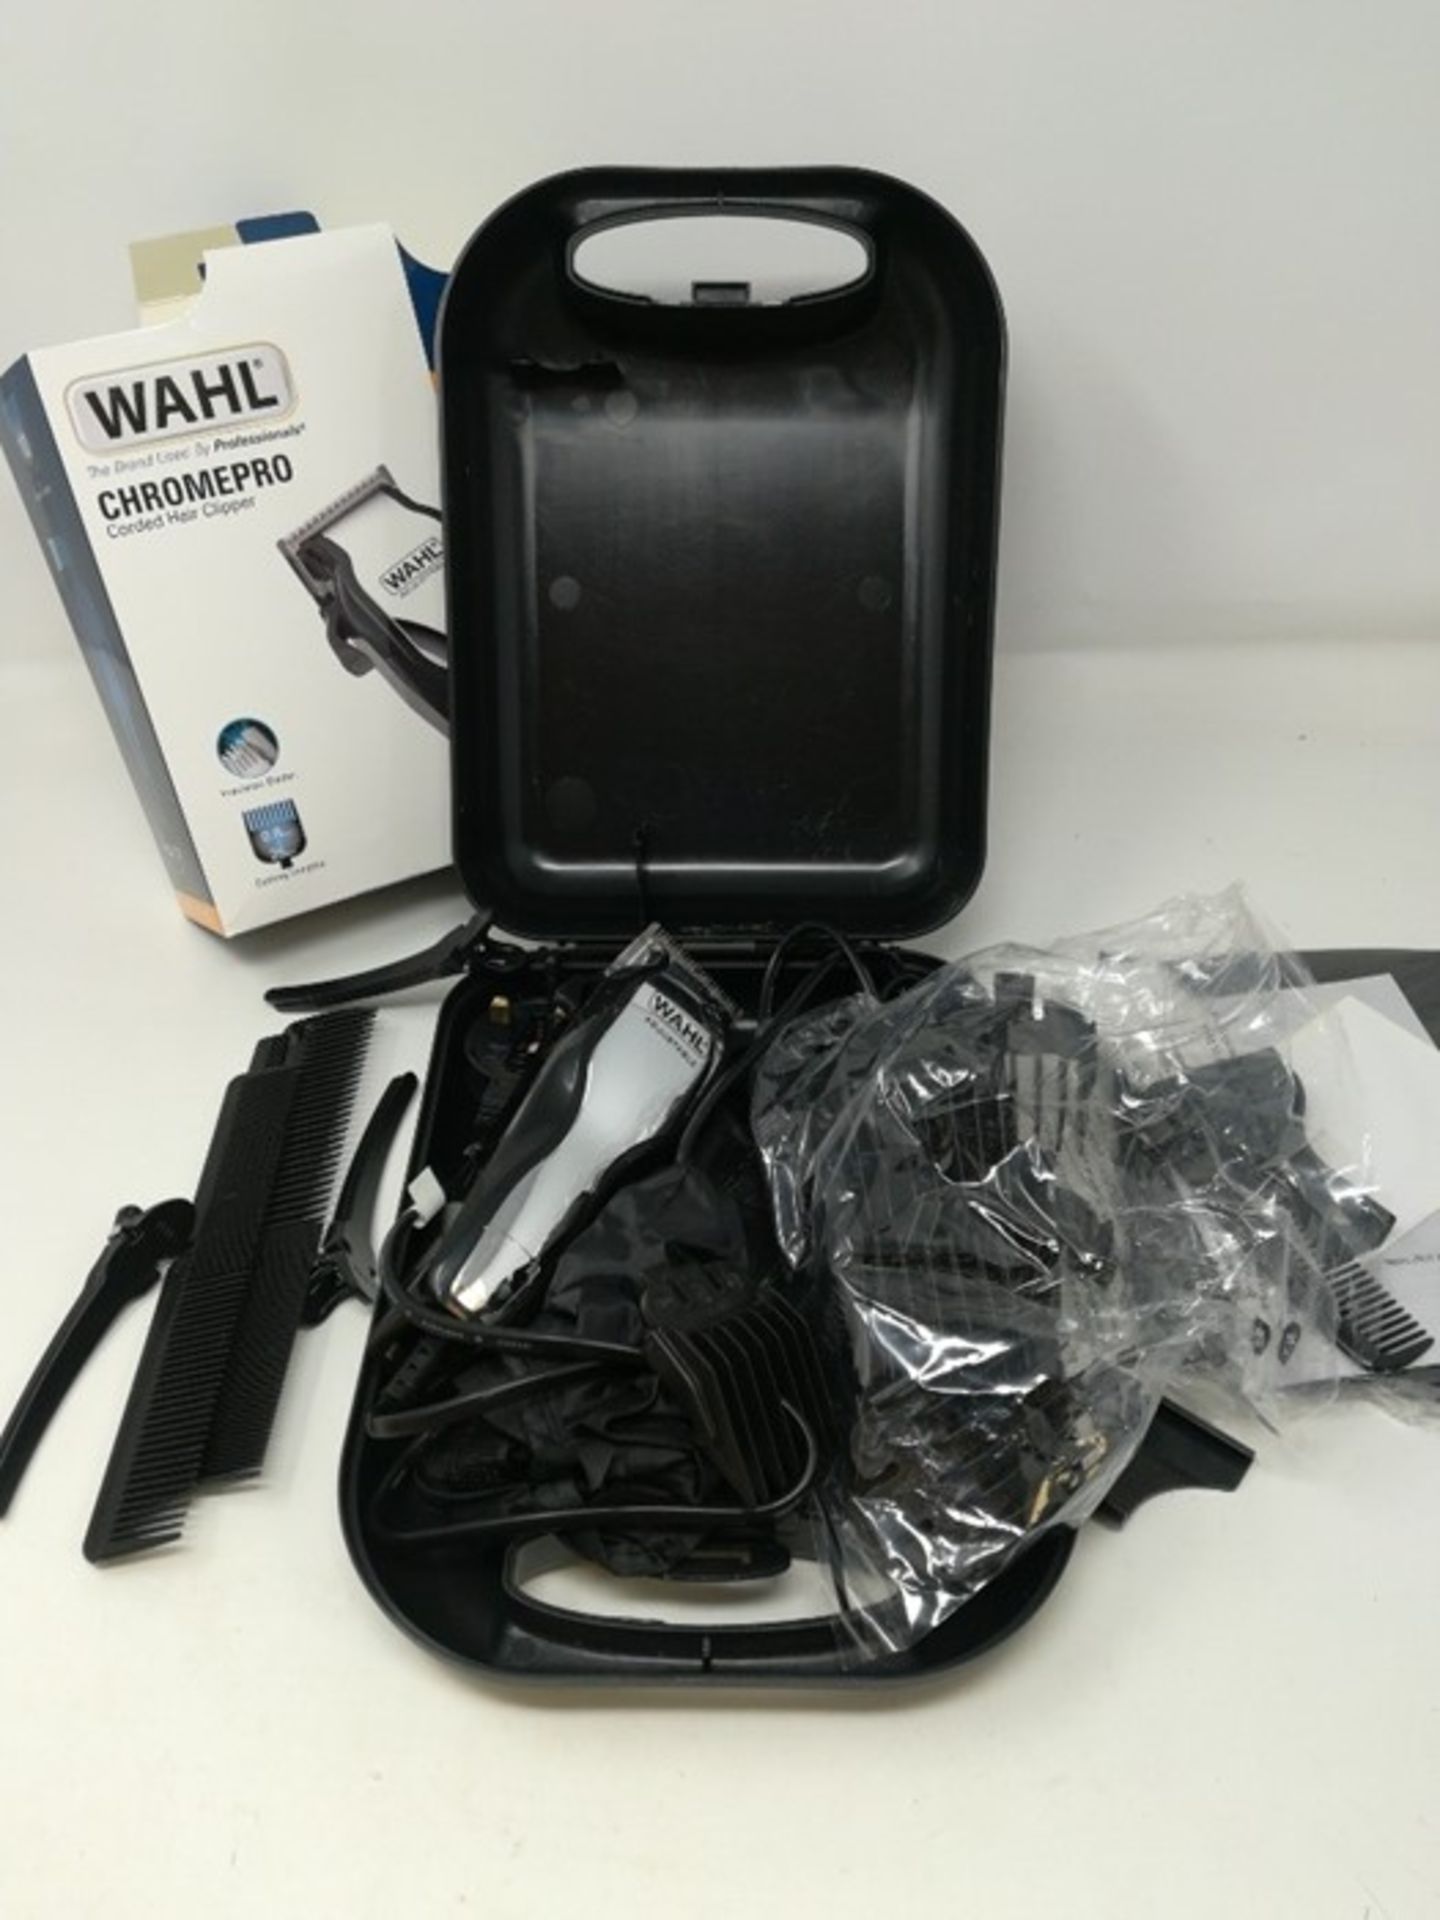 Wahl Hair Clippers for Men, Chrome Pro Head Shav - Image 2 of 2